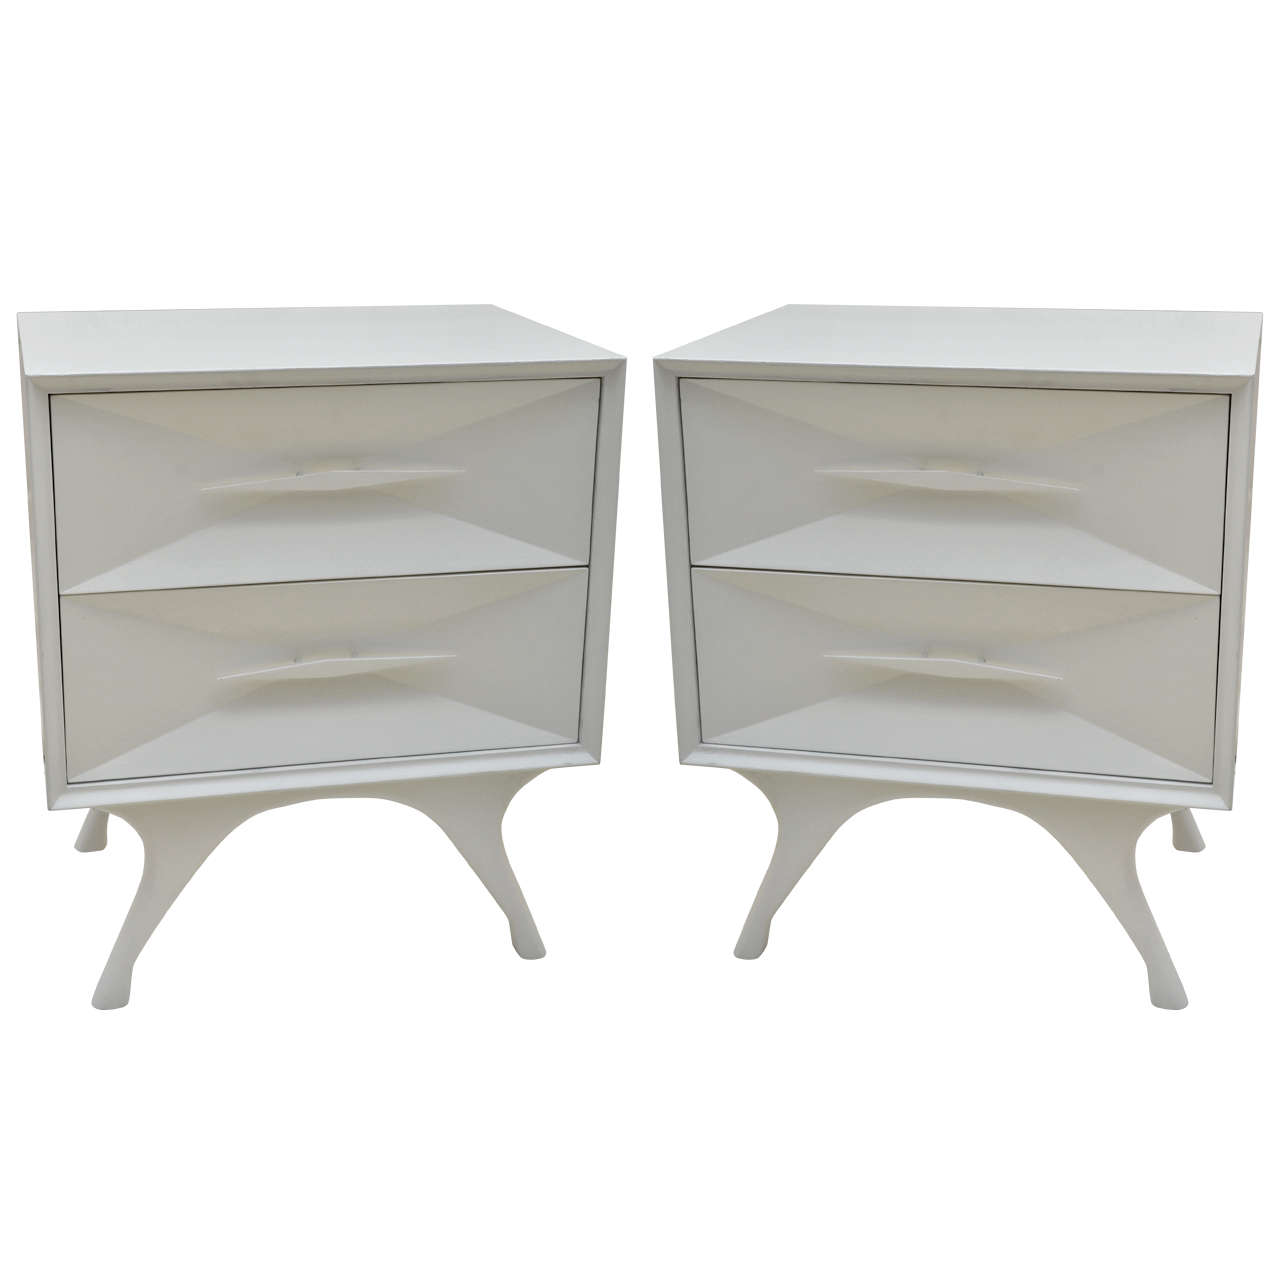 Pair White Painted Mid Century Modern Bedside Tables